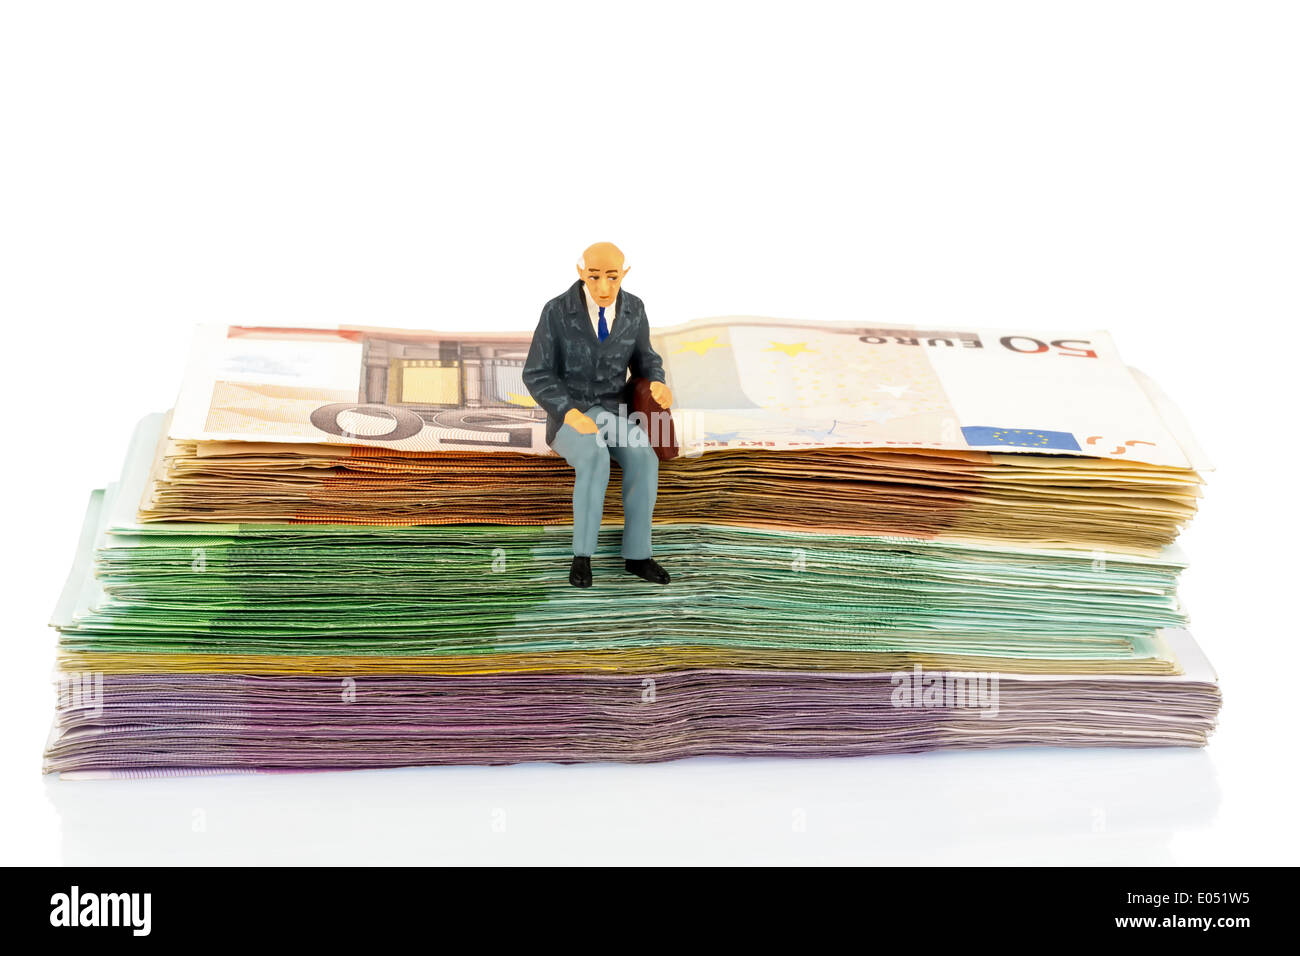 Symbolic photo for retirement and provision for the old age, figure of an old man sits on a pile of bank notes, Symbolfoto fuer Stock Photo